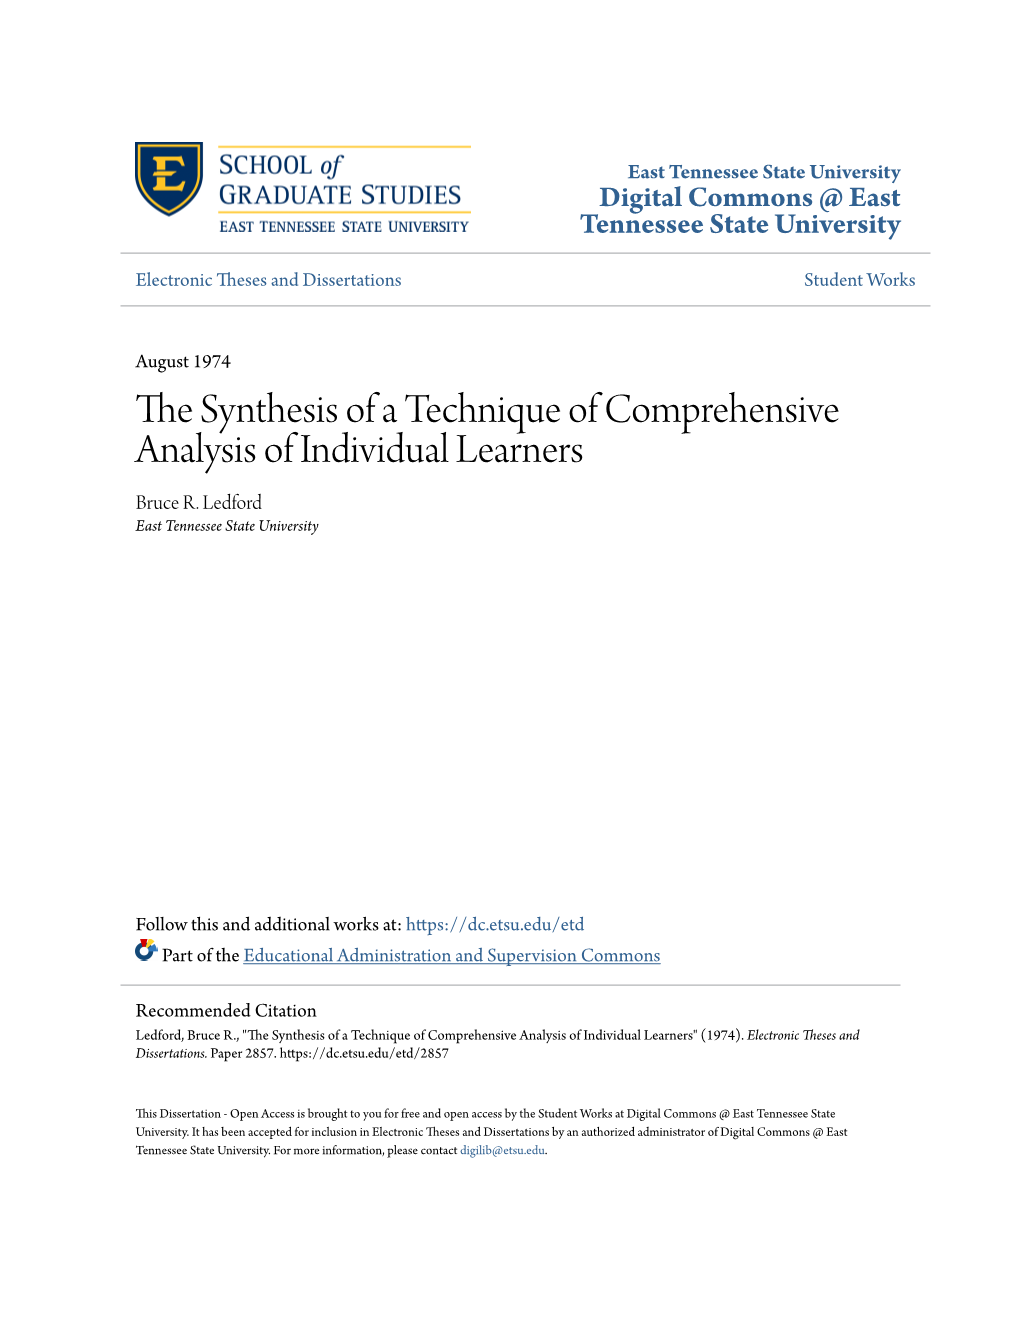 The Synthesis of a Technique of Comprehensive Analysis of Individual Learners